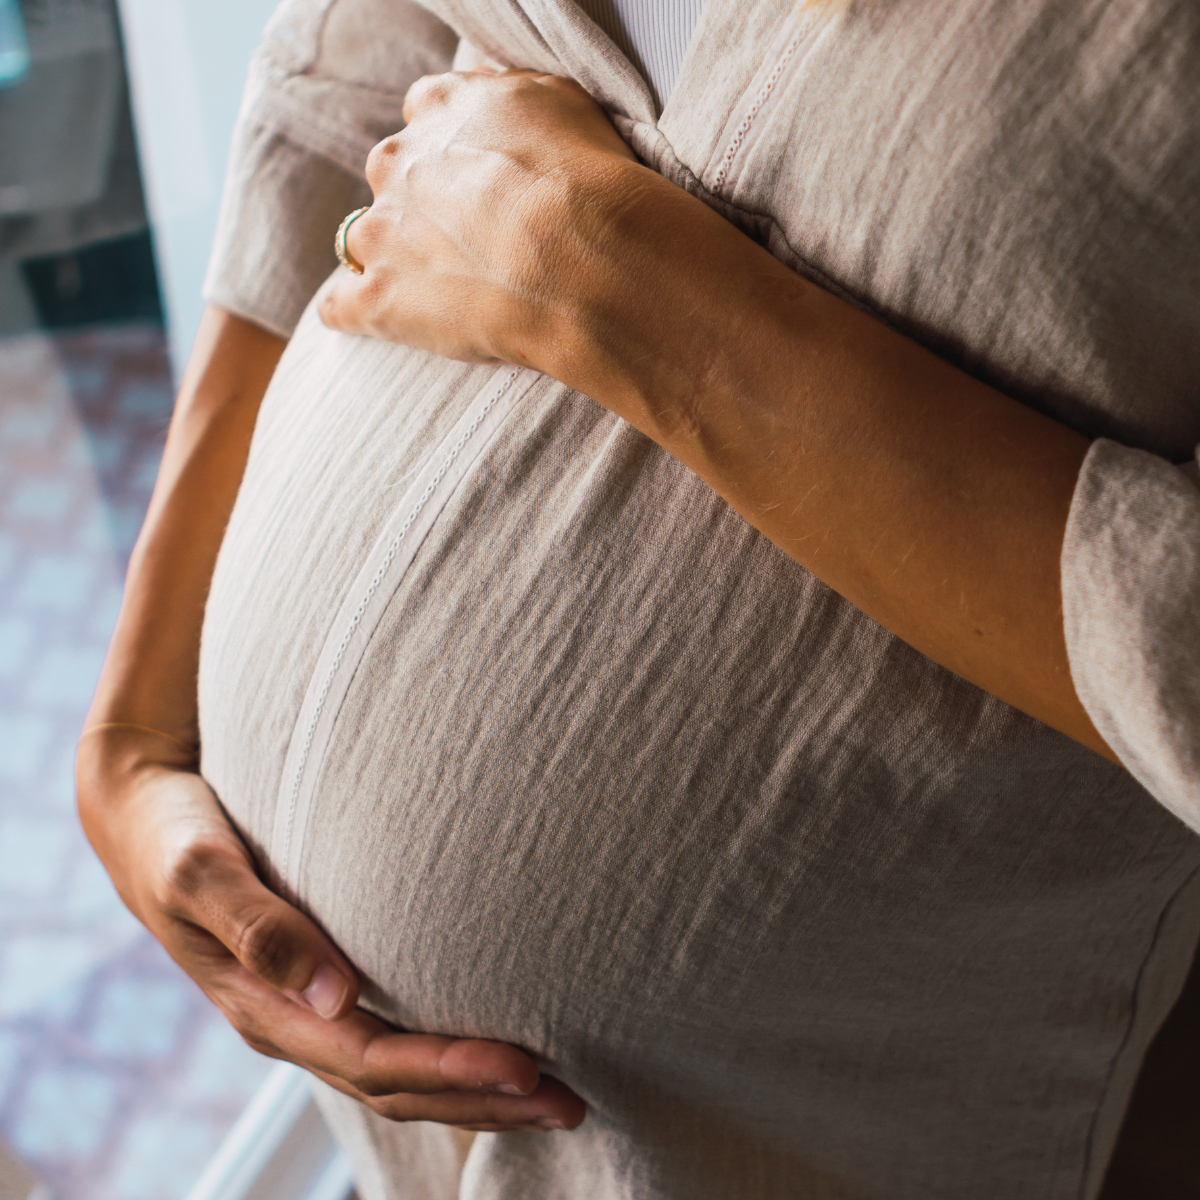 The Maternal Microbiome